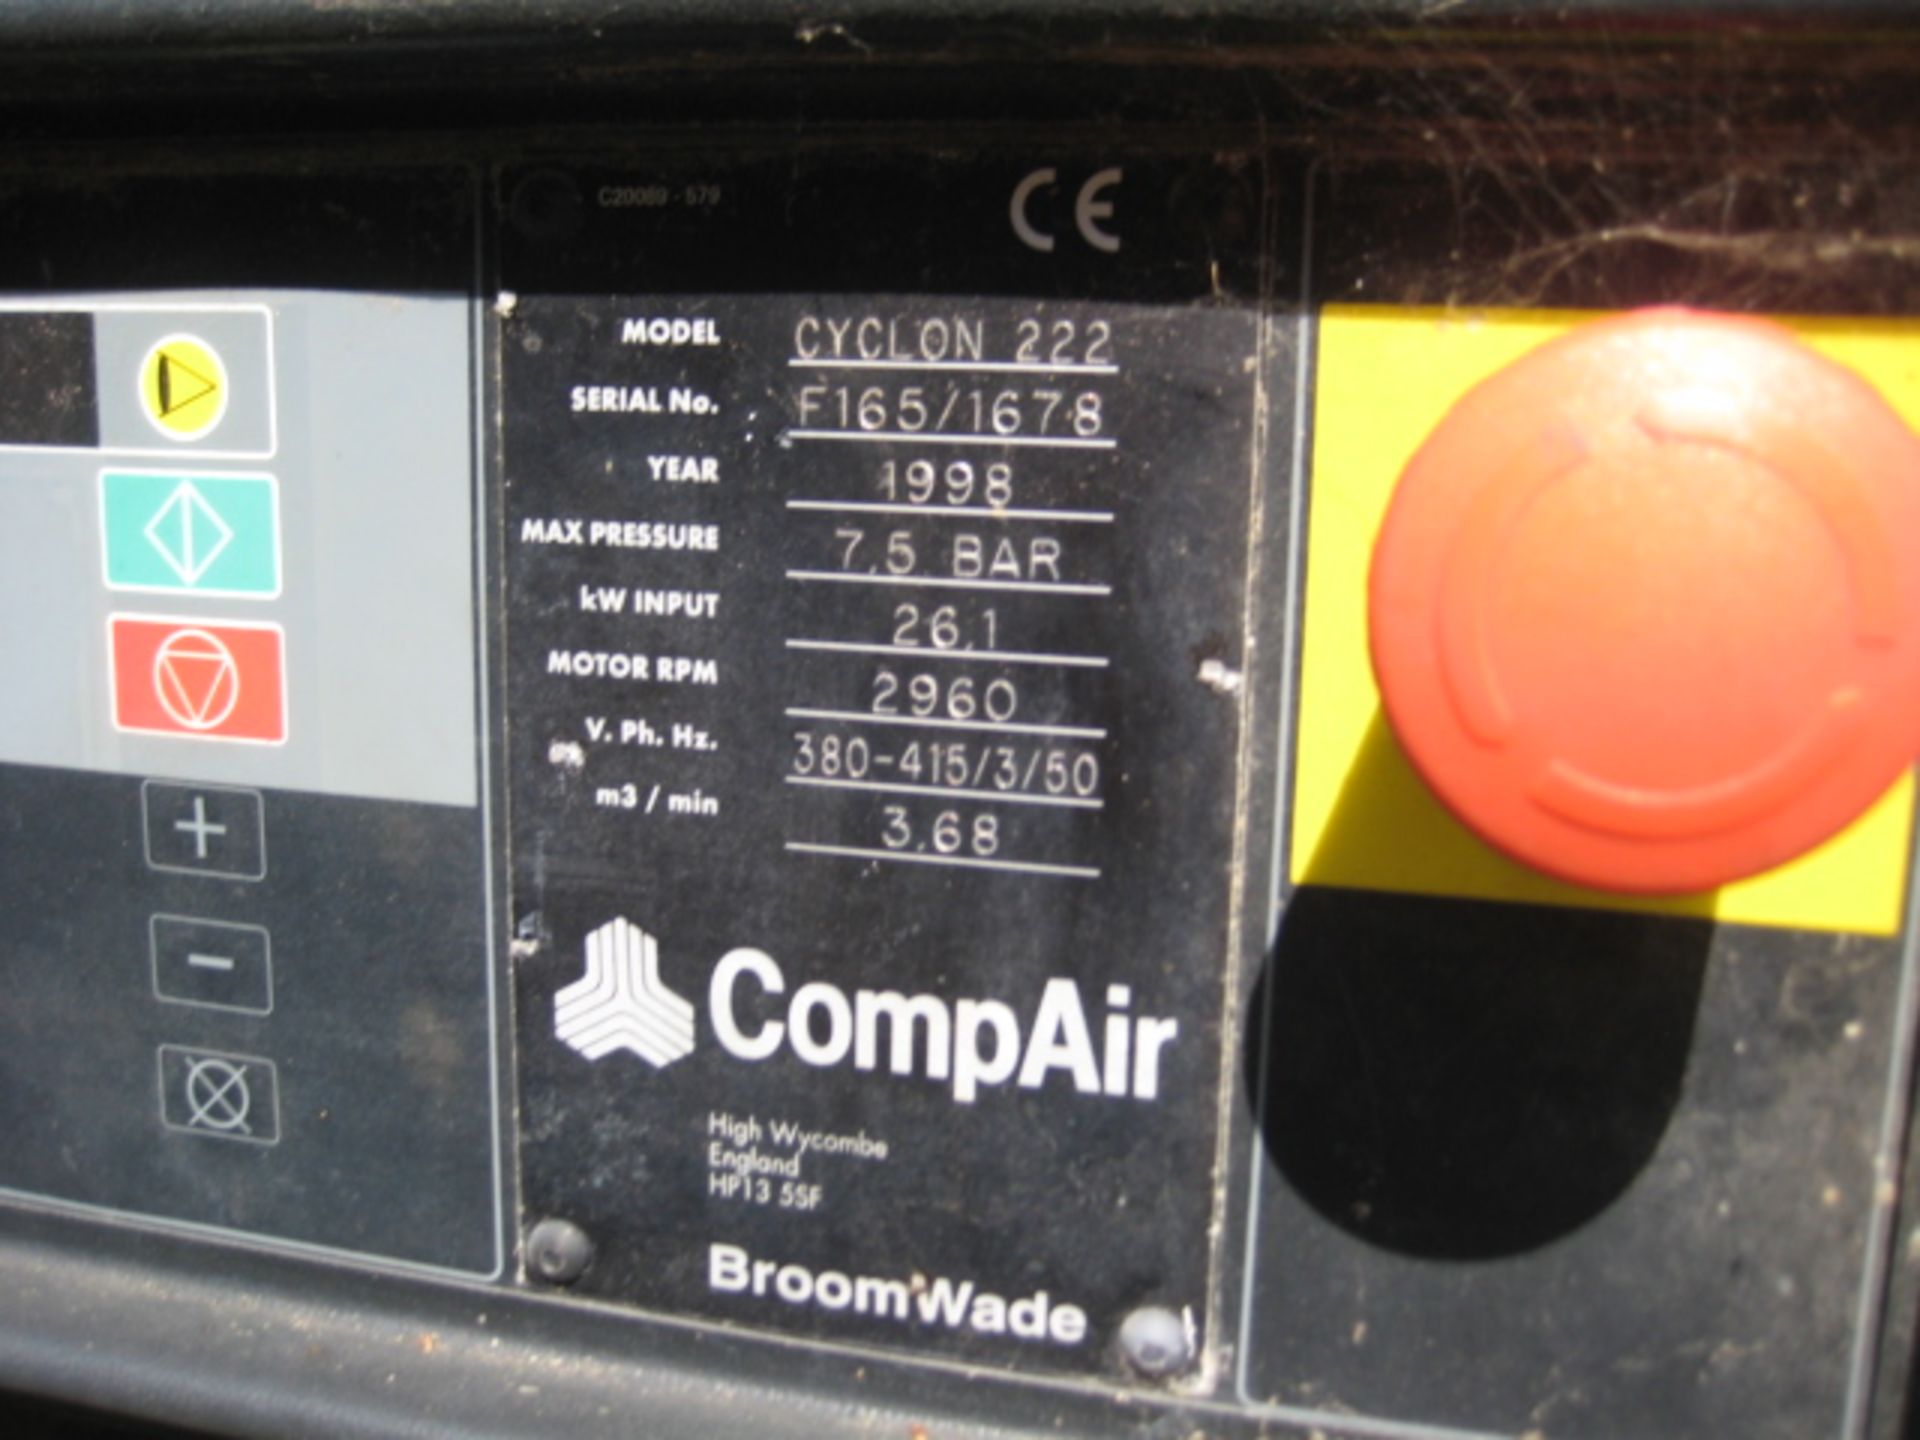 Broomwade Compair Cyclon 22 Compressor, serial no. F165/1678, year of manufacture 1998, in - Bild 2 aus 5